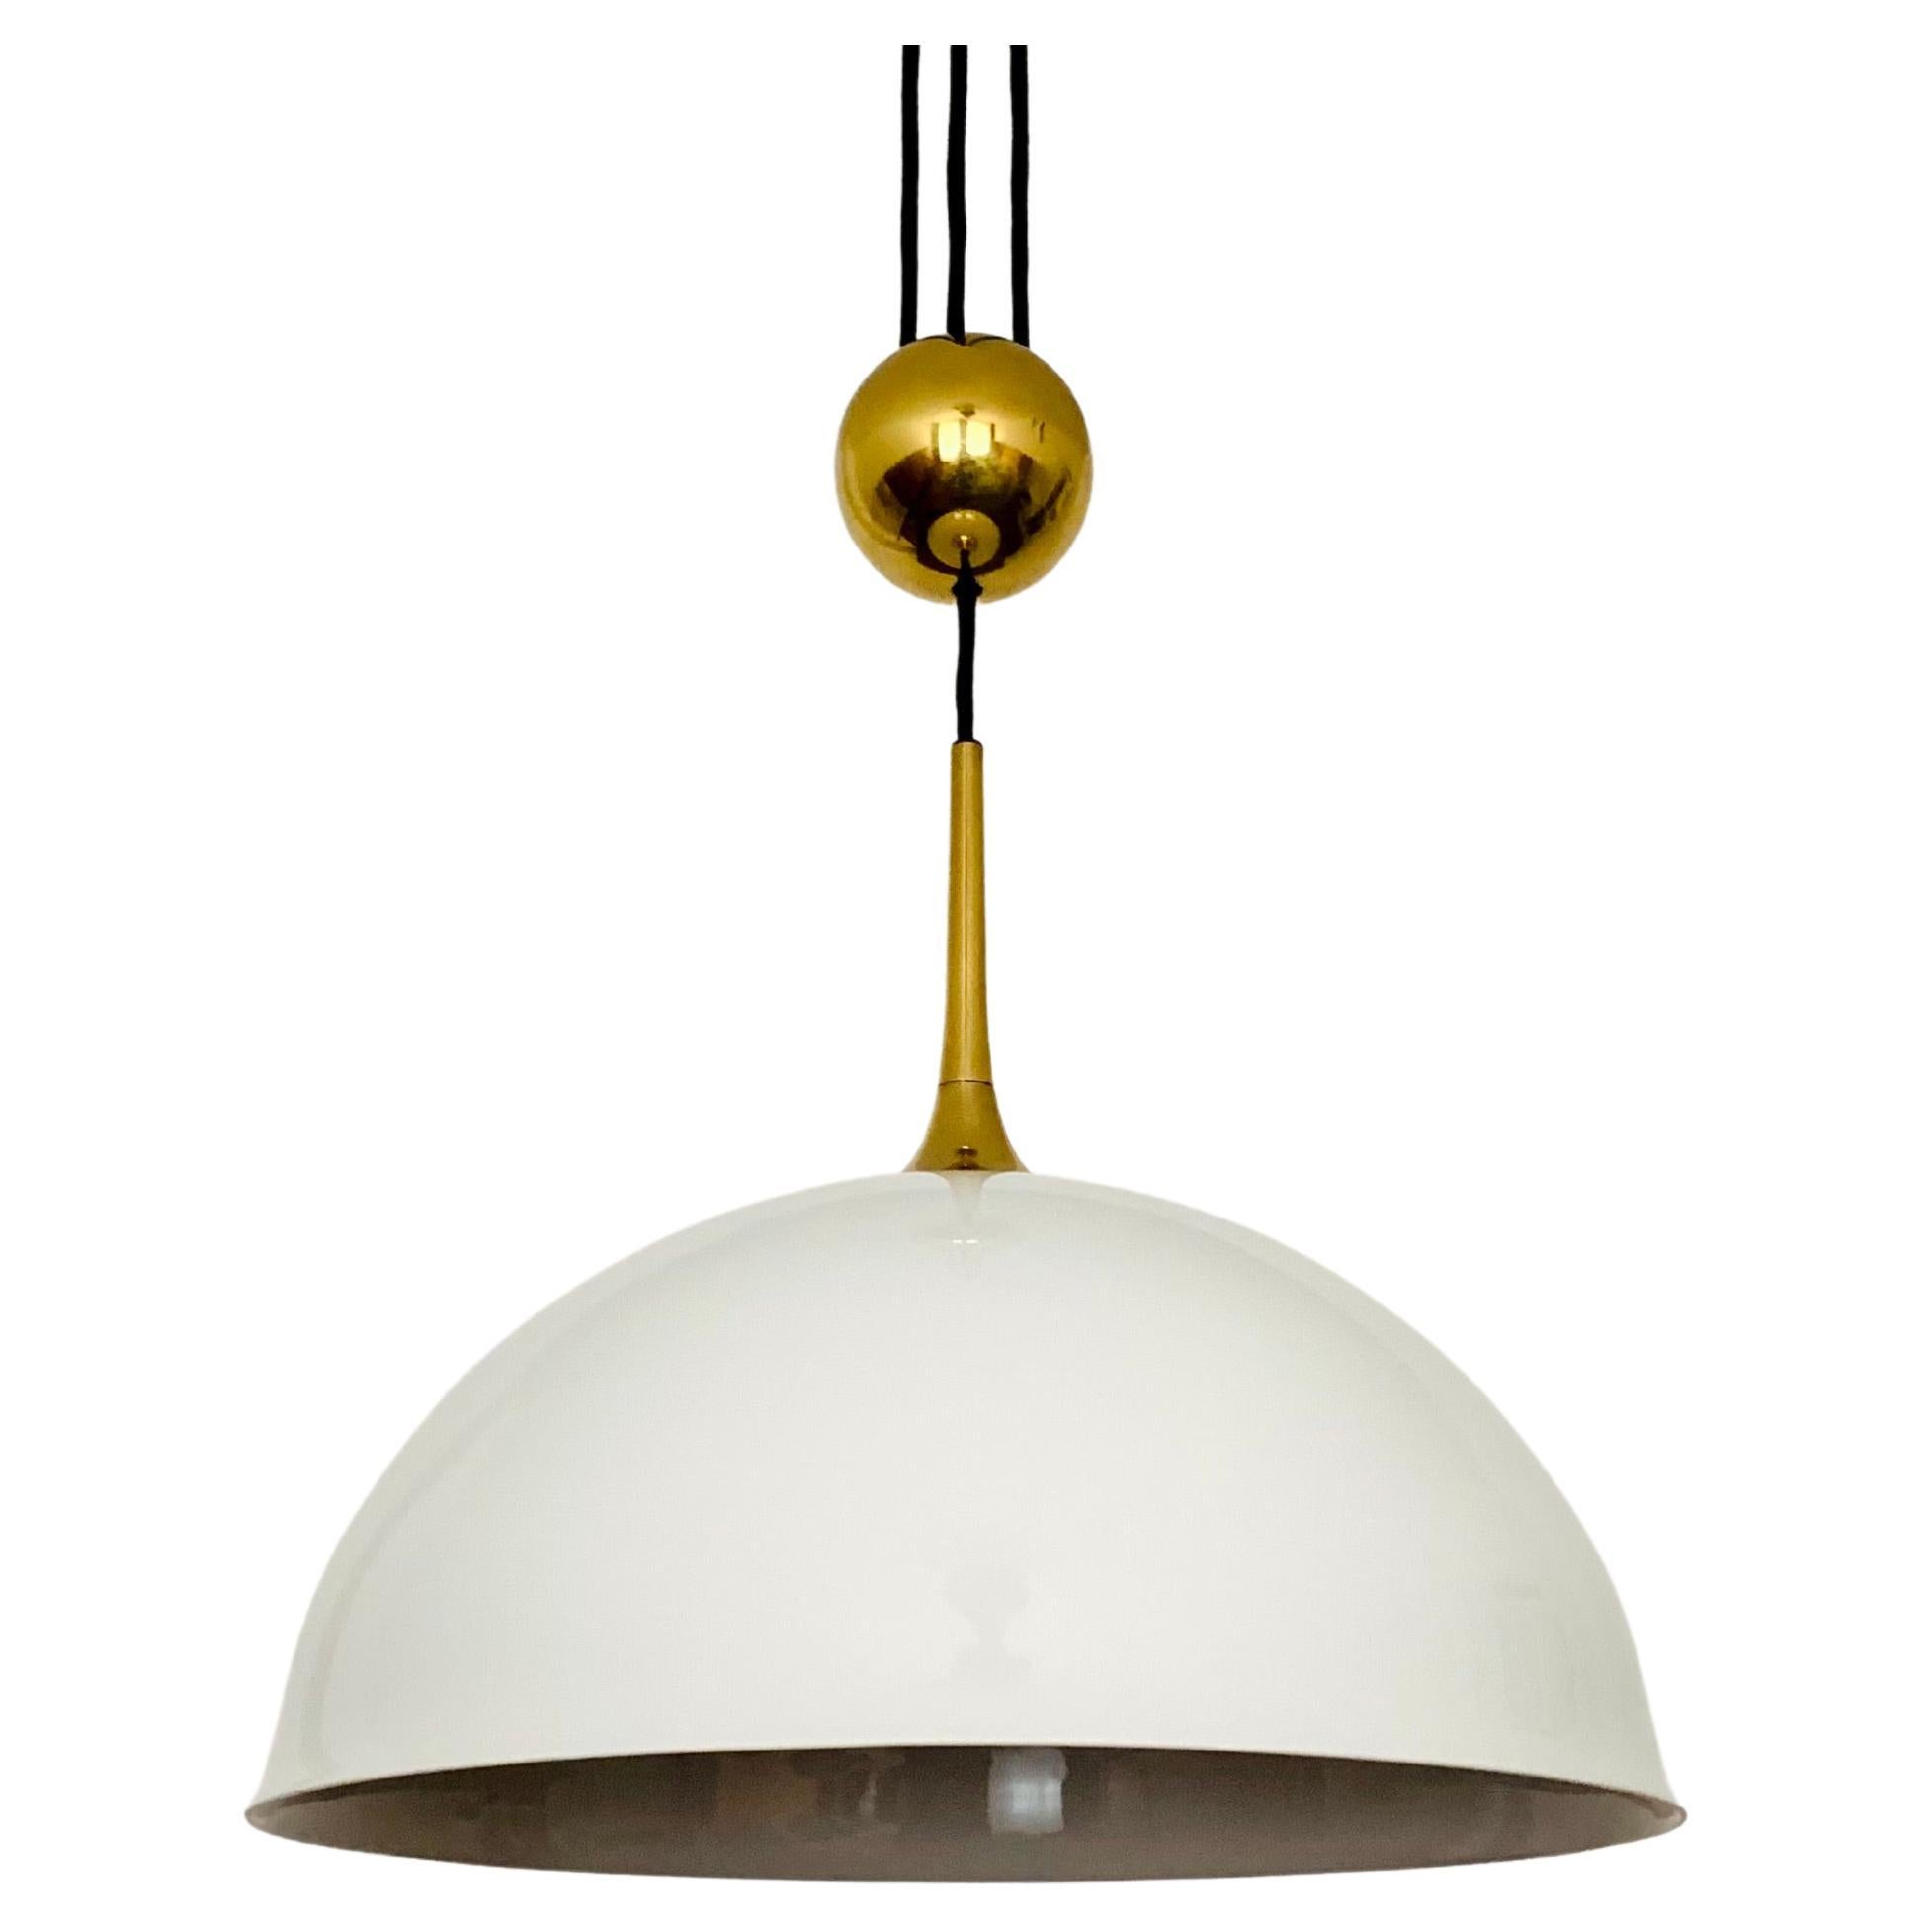 Posa pendant lamp with porcelain shade by Florian Schulz